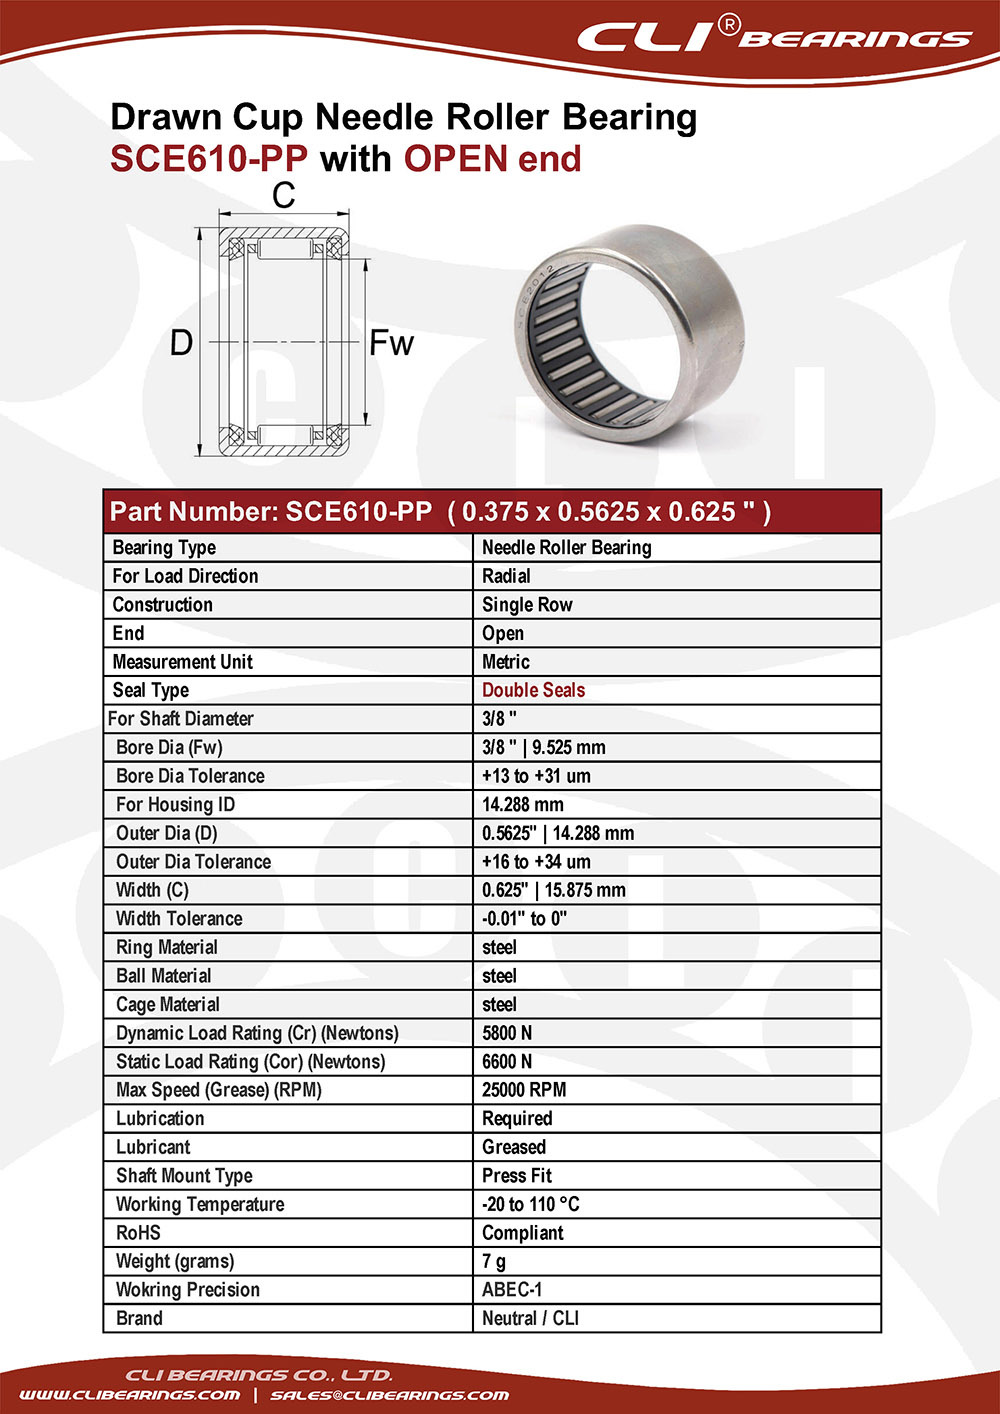 Original sce610 pp 0 375x0 5625x0 625 drawn cup needle roller bearings with double seals   cli bearings co ltd nw